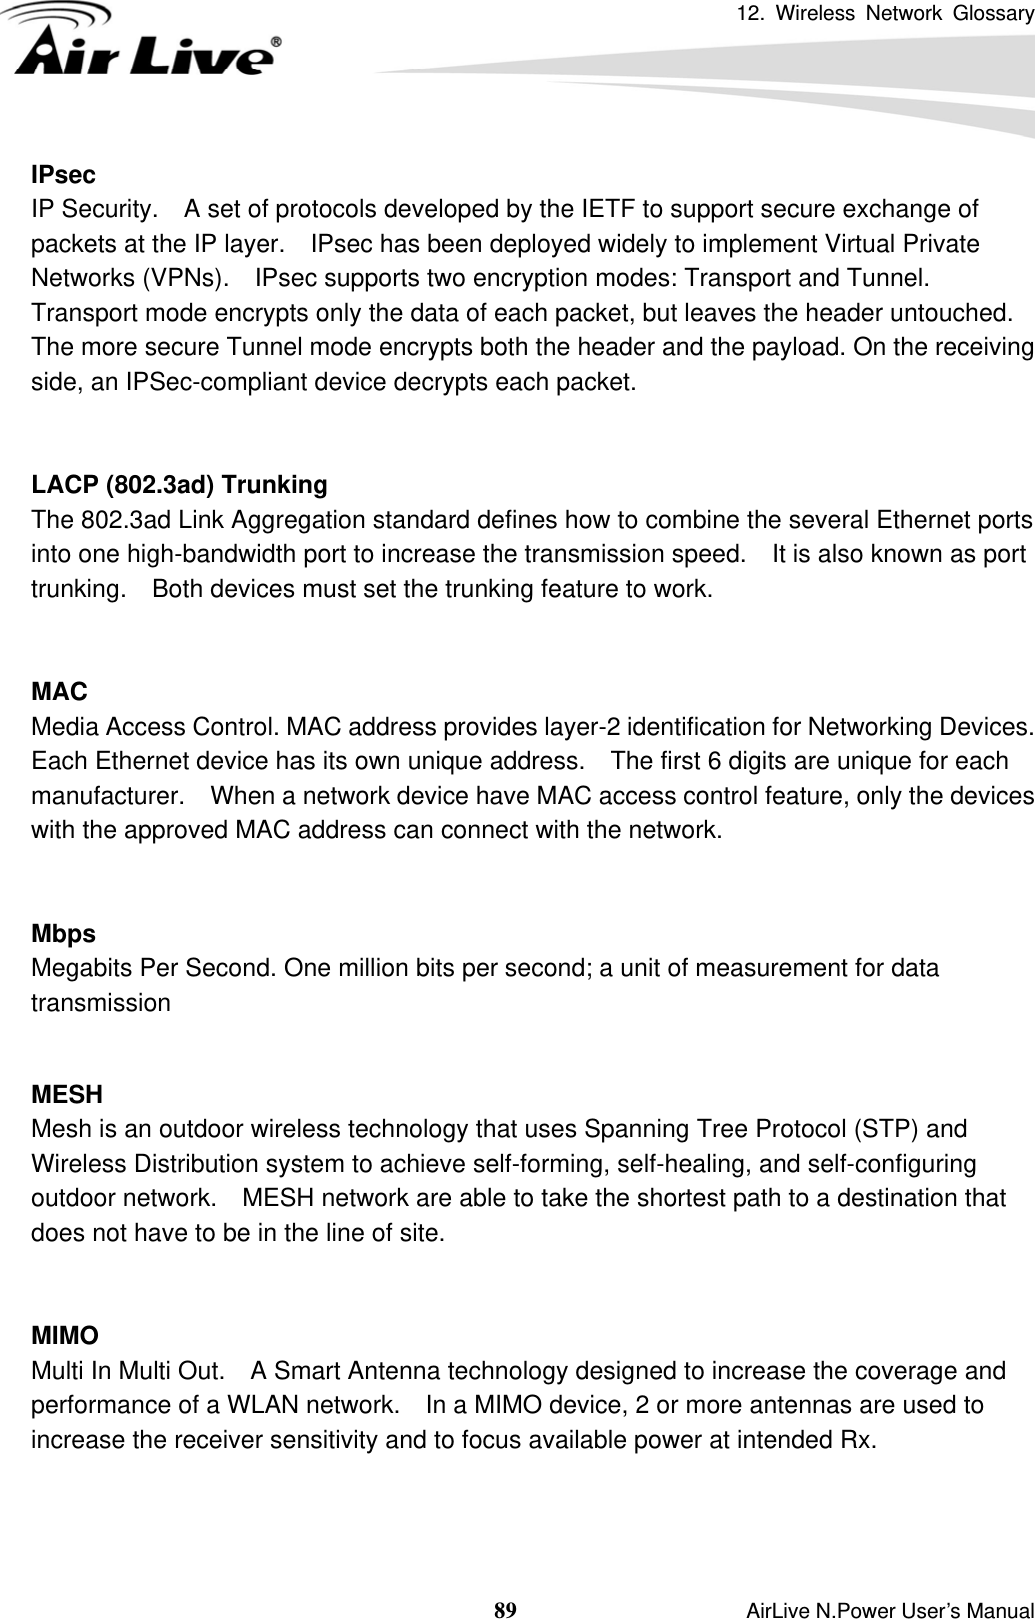 12. Wireless Network Glossary  89                    AirLive N.Power User’s Manual IPsec IP Security.    A set of protocols developed by the IETF to support secure exchange of packets at the IP layer.    IPsec has been deployed widely to implement Virtual Private Networks (VPNs).    IPsec supports two encryption modes: Transport and Tunnel.   Transport mode encrypts only the data of each packet, but leaves the header untouched.   The more secure Tunnel mode encrypts both the header and the payload. On the receiving side, an IPSec-compliant device decrypts each packet.   LACP (802.3ad) Trunking The 802.3ad Link Aggregation standard defines how to combine the several Ethernet ports into one high-bandwidth port to increase the transmission speed.    It is also known as port trunking.    Both devices must set the trunking feature to work.   MAC Media Access Control. MAC address provides layer-2 identification for Networking Devices.   Each Ethernet device has its own unique address.    The first 6 digits are unique for each manufacturer.    When a network device have MAC access control feature, only the devices with the approved MAC address can connect with the network.   Mbps Megabits Per Second. One million bits per second; a unit of measurement for data transmission   MESH Mesh is an outdoor wireless technology that uses Spanning Tree Protocol (STP) and Wireless Distribution system to achieve self-forming, self-healing, and self-configuring outdoor network.    MESH network are able to take the shortest path to a destination that does not have to be in the line of site.   MIMO Multi In Multi Out.    A Smart Antenna technology designed to increase the coverage and performance of a WLAN network.    In a MIMO device, 2 or more antennas are used to increase the receiver sensitivity and to focus available power at intended Rx.    